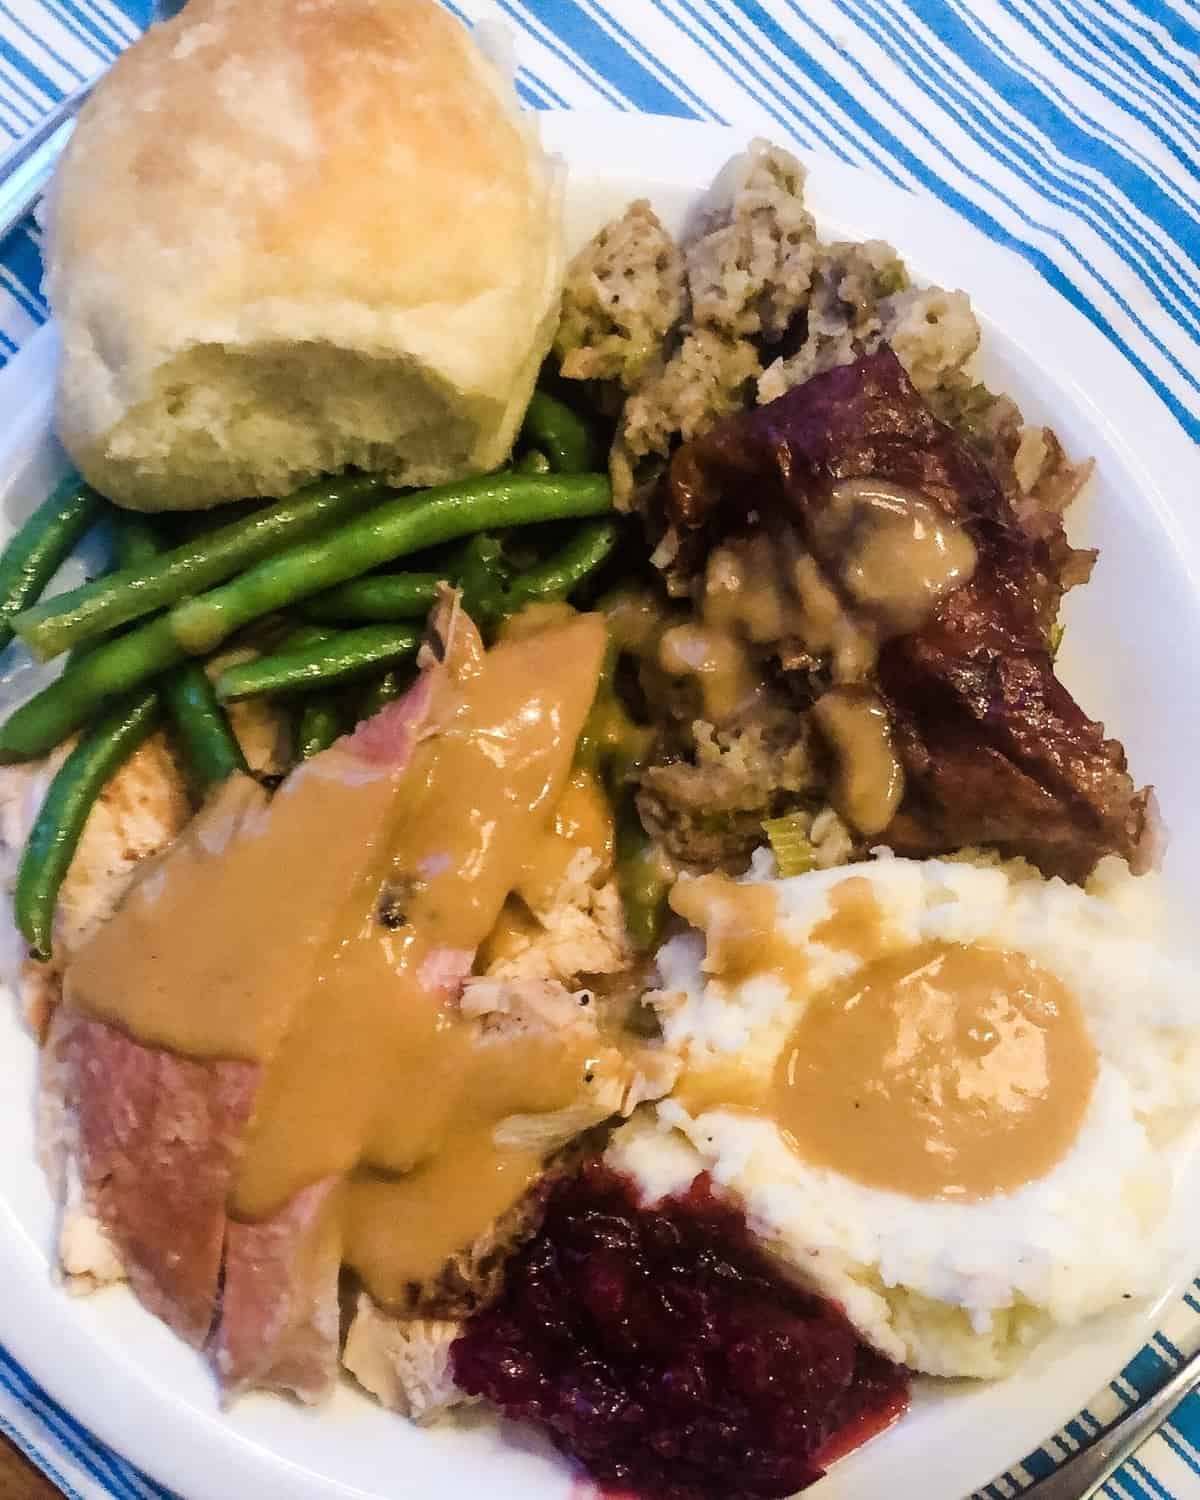 plate of mashed potatoes, grilled turkey, cranberry sauce, green beans and dinner roll